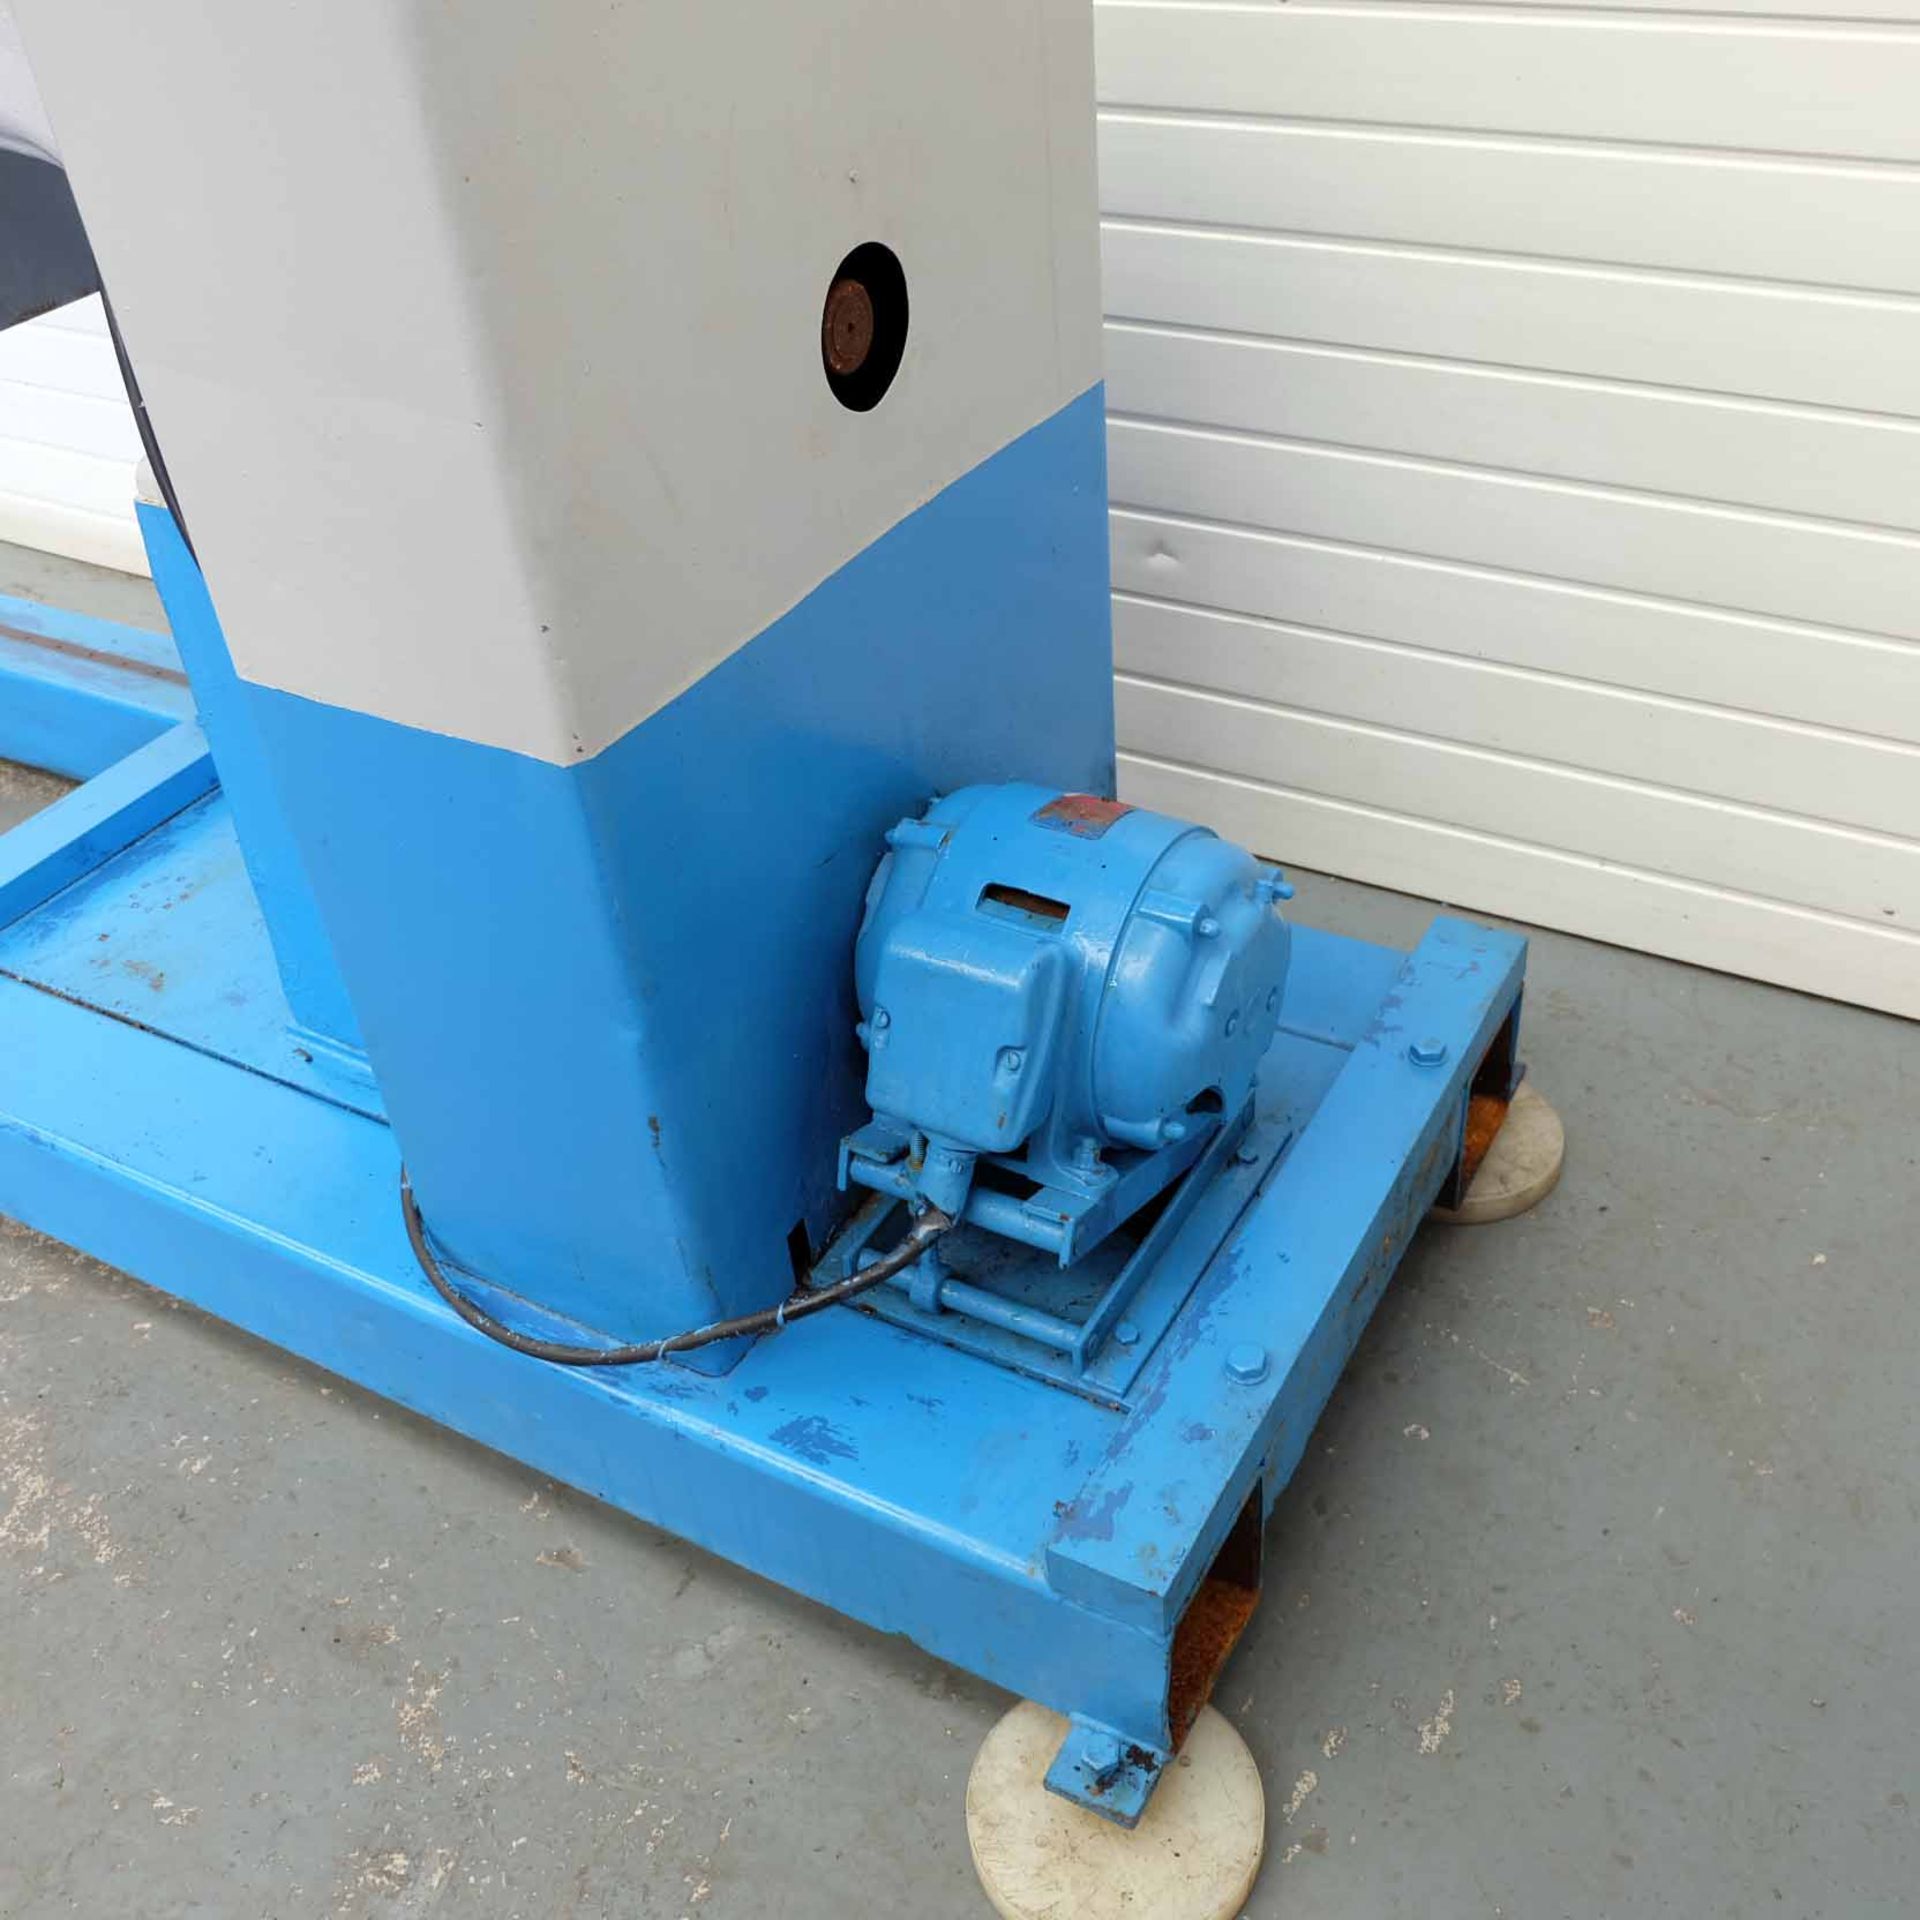 Frost Swaging Machine. Throat Depth 36" Approx. With Tailstock. Motor 3 Phase, 1 HP. - Bild 9 aus 10